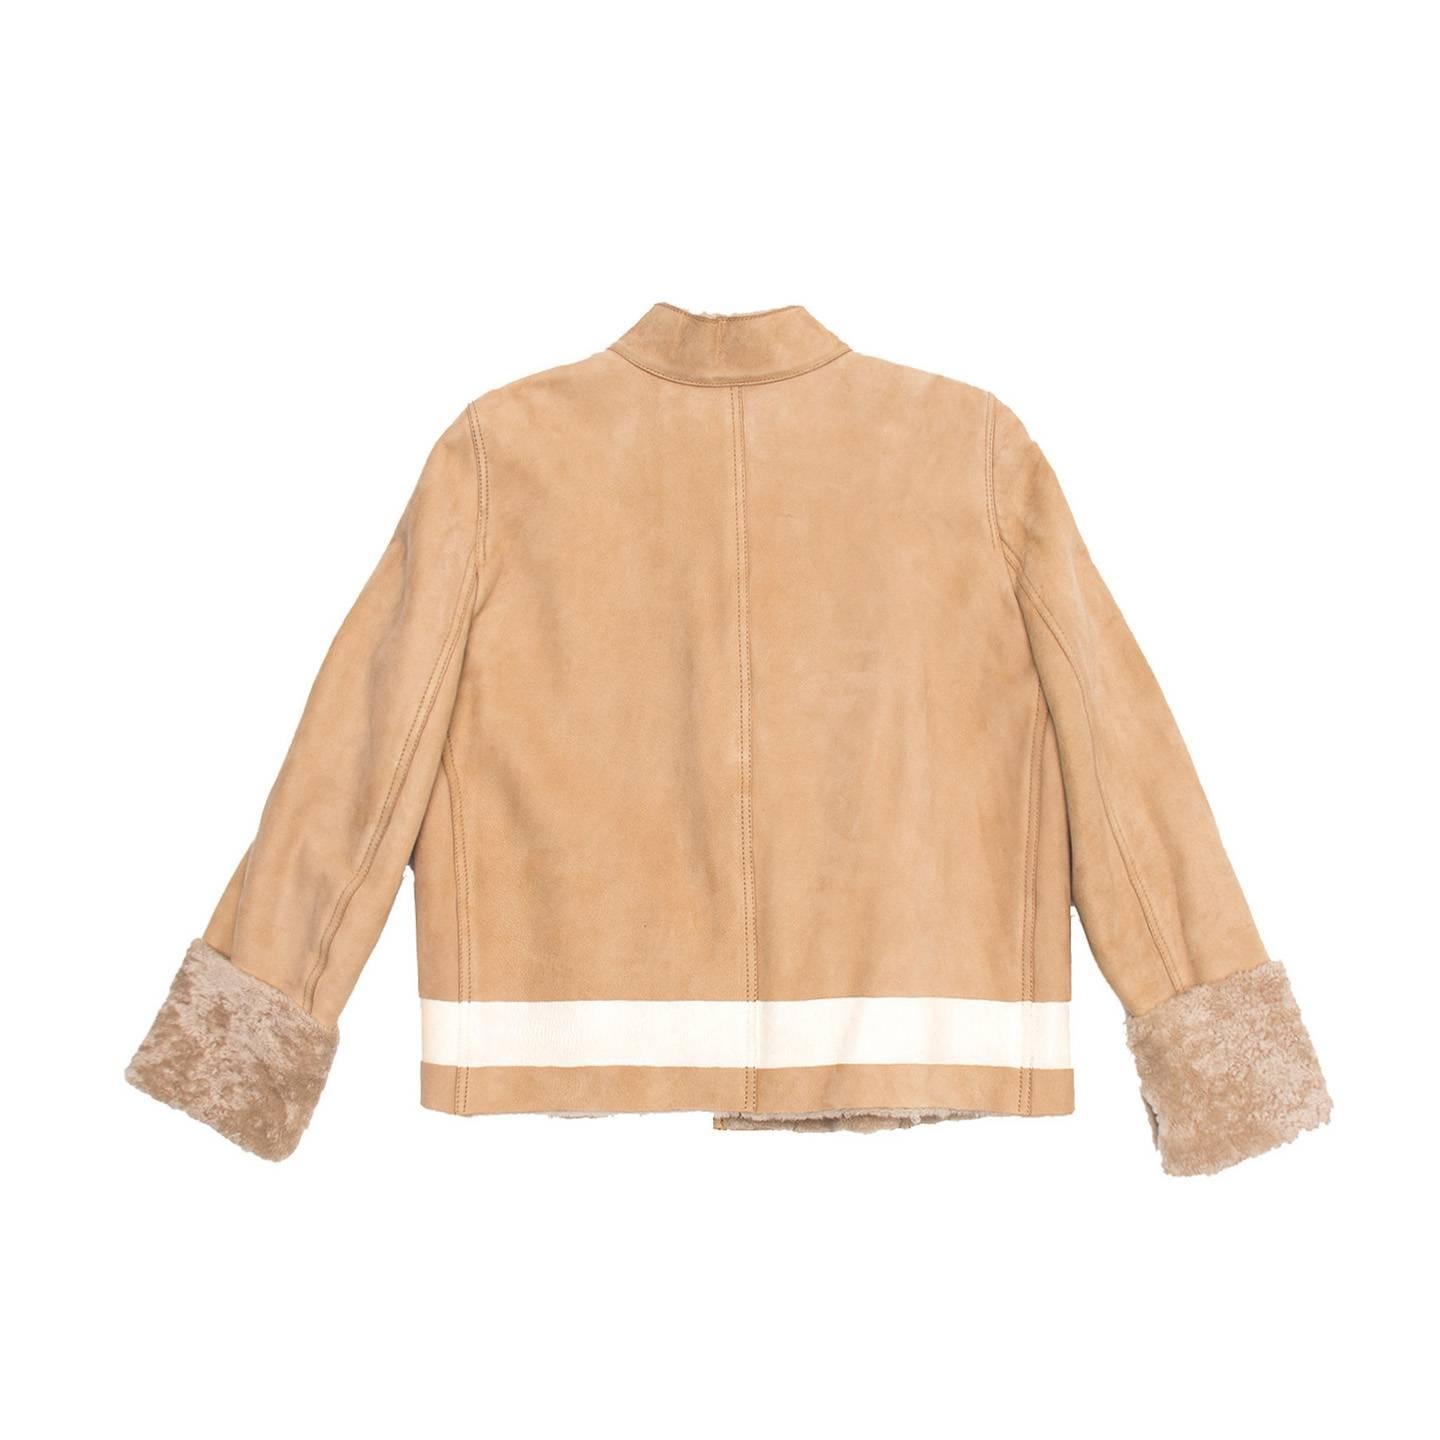 Yves Saint Laurent Tan Shearling Short Jacket In Excellent Condition For Sale In Brooklyn, NY